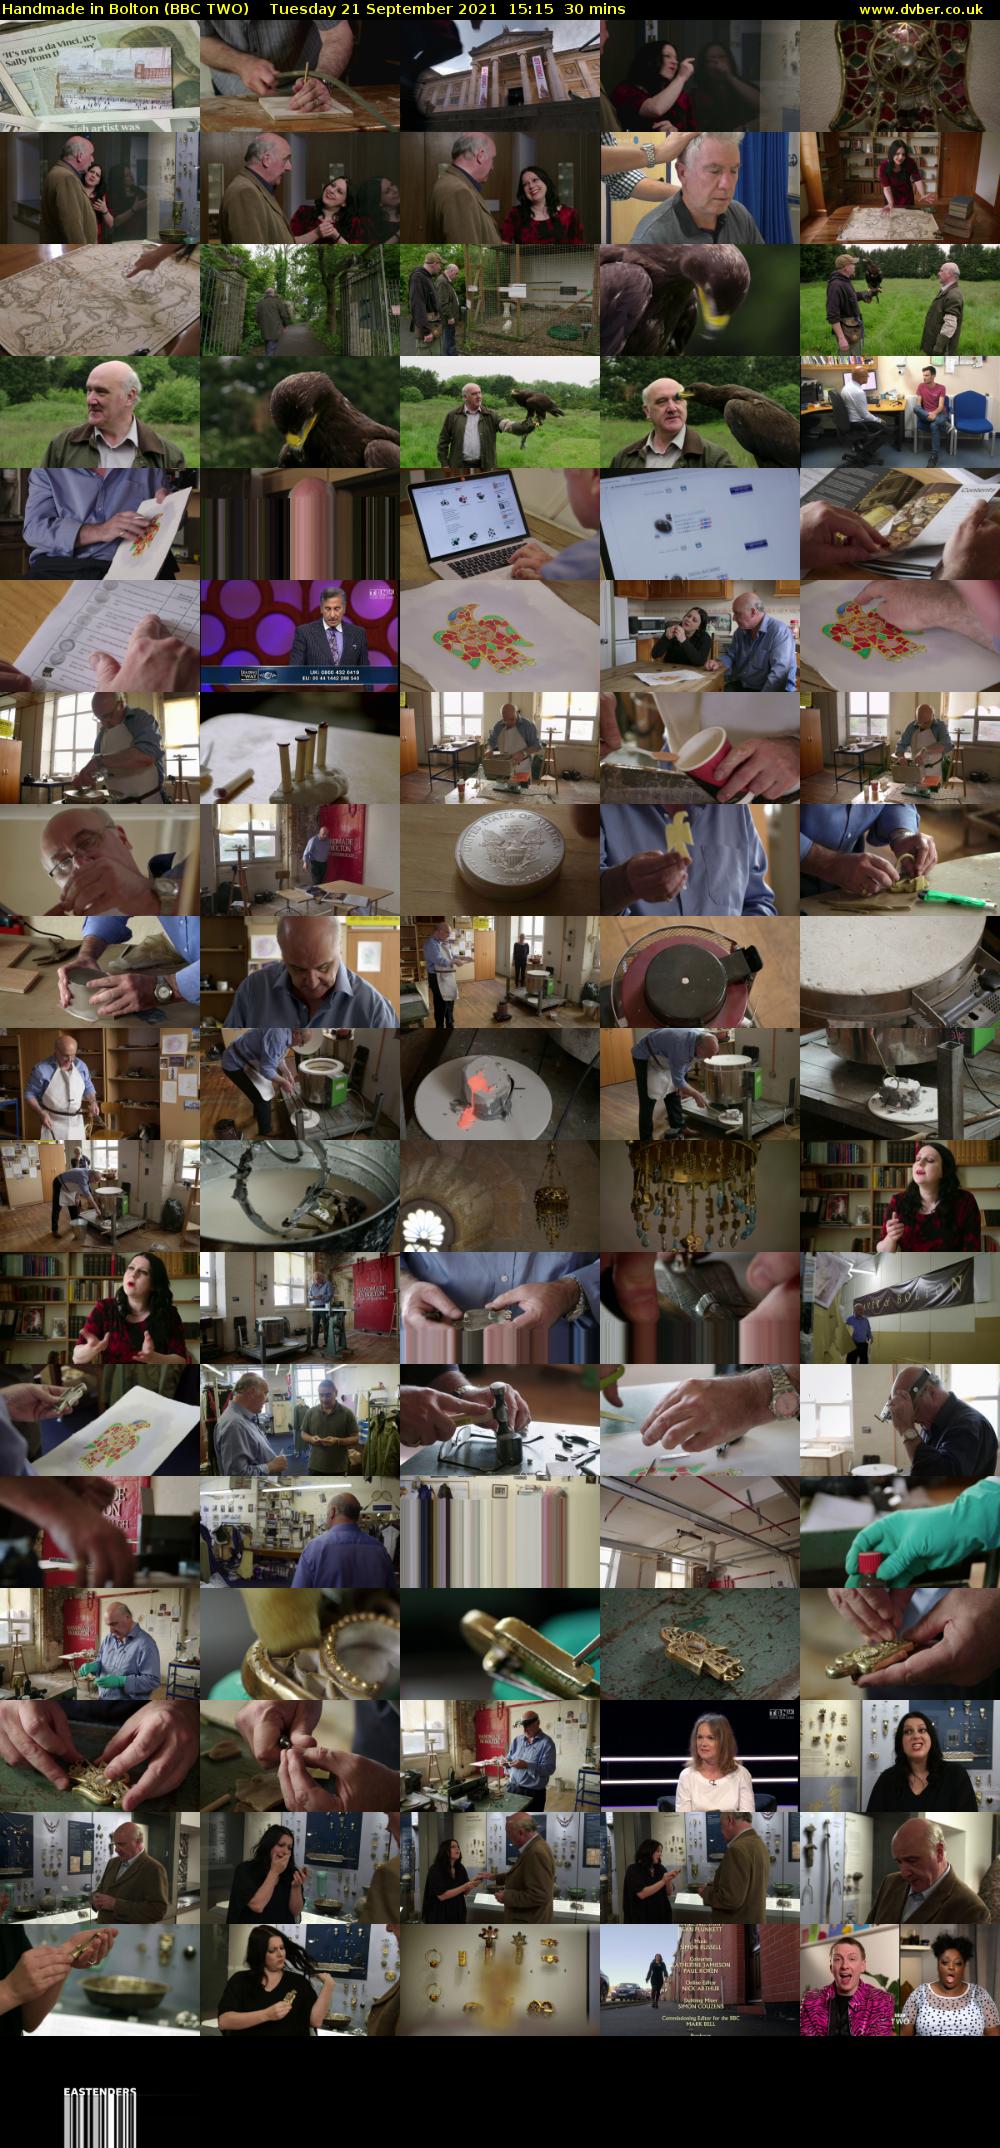 Handmade in Bolton (BBC TWO) Tuesday 21 September 2021 15:15 - 15:45